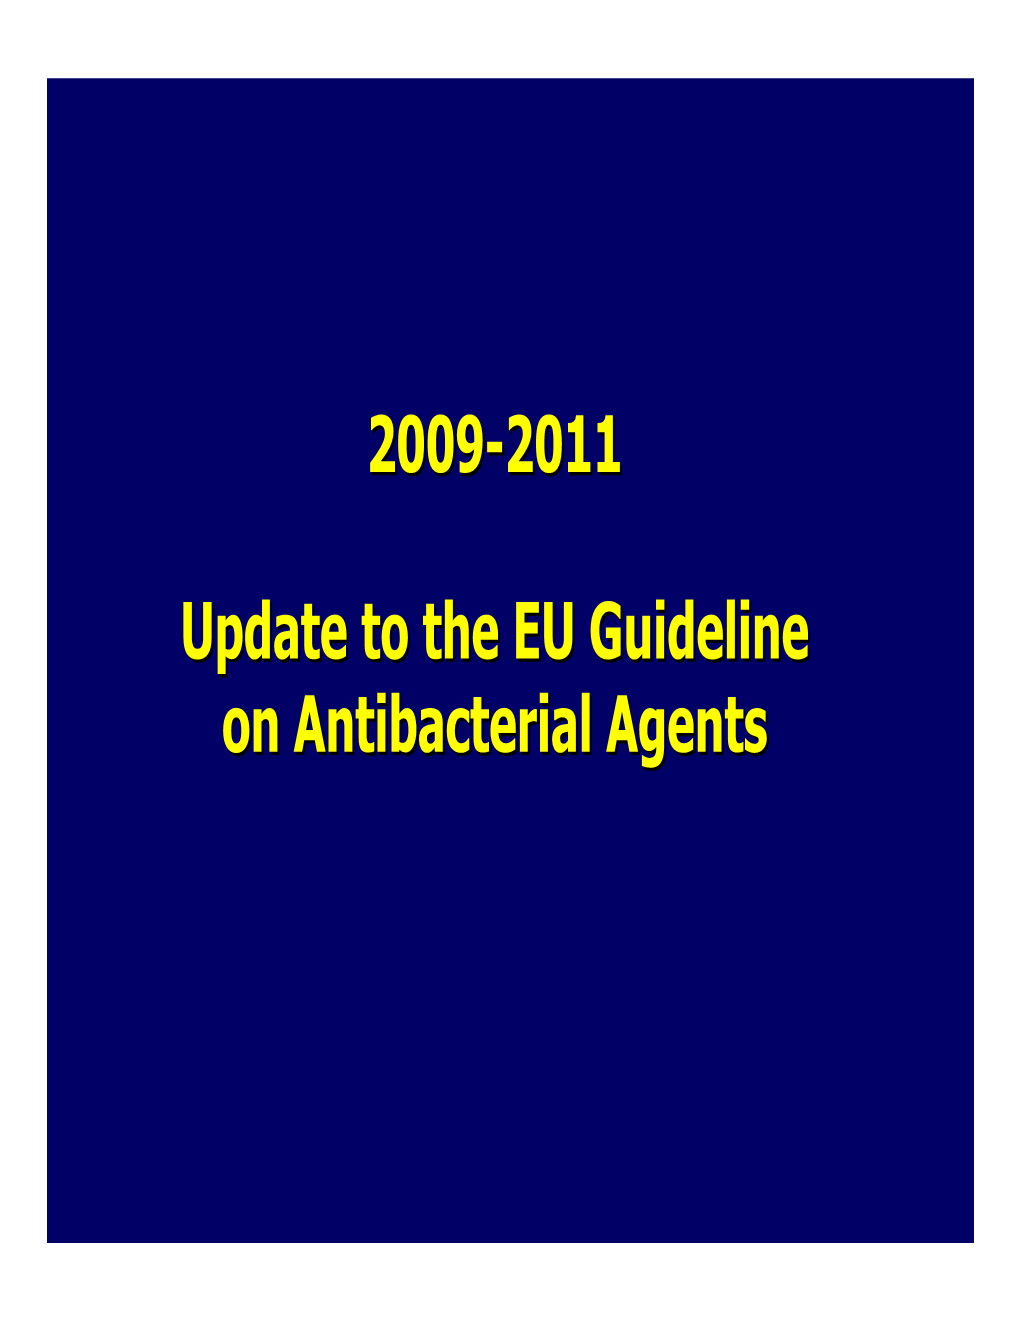 Update to the European Union Guideline on Antibacterial Agents